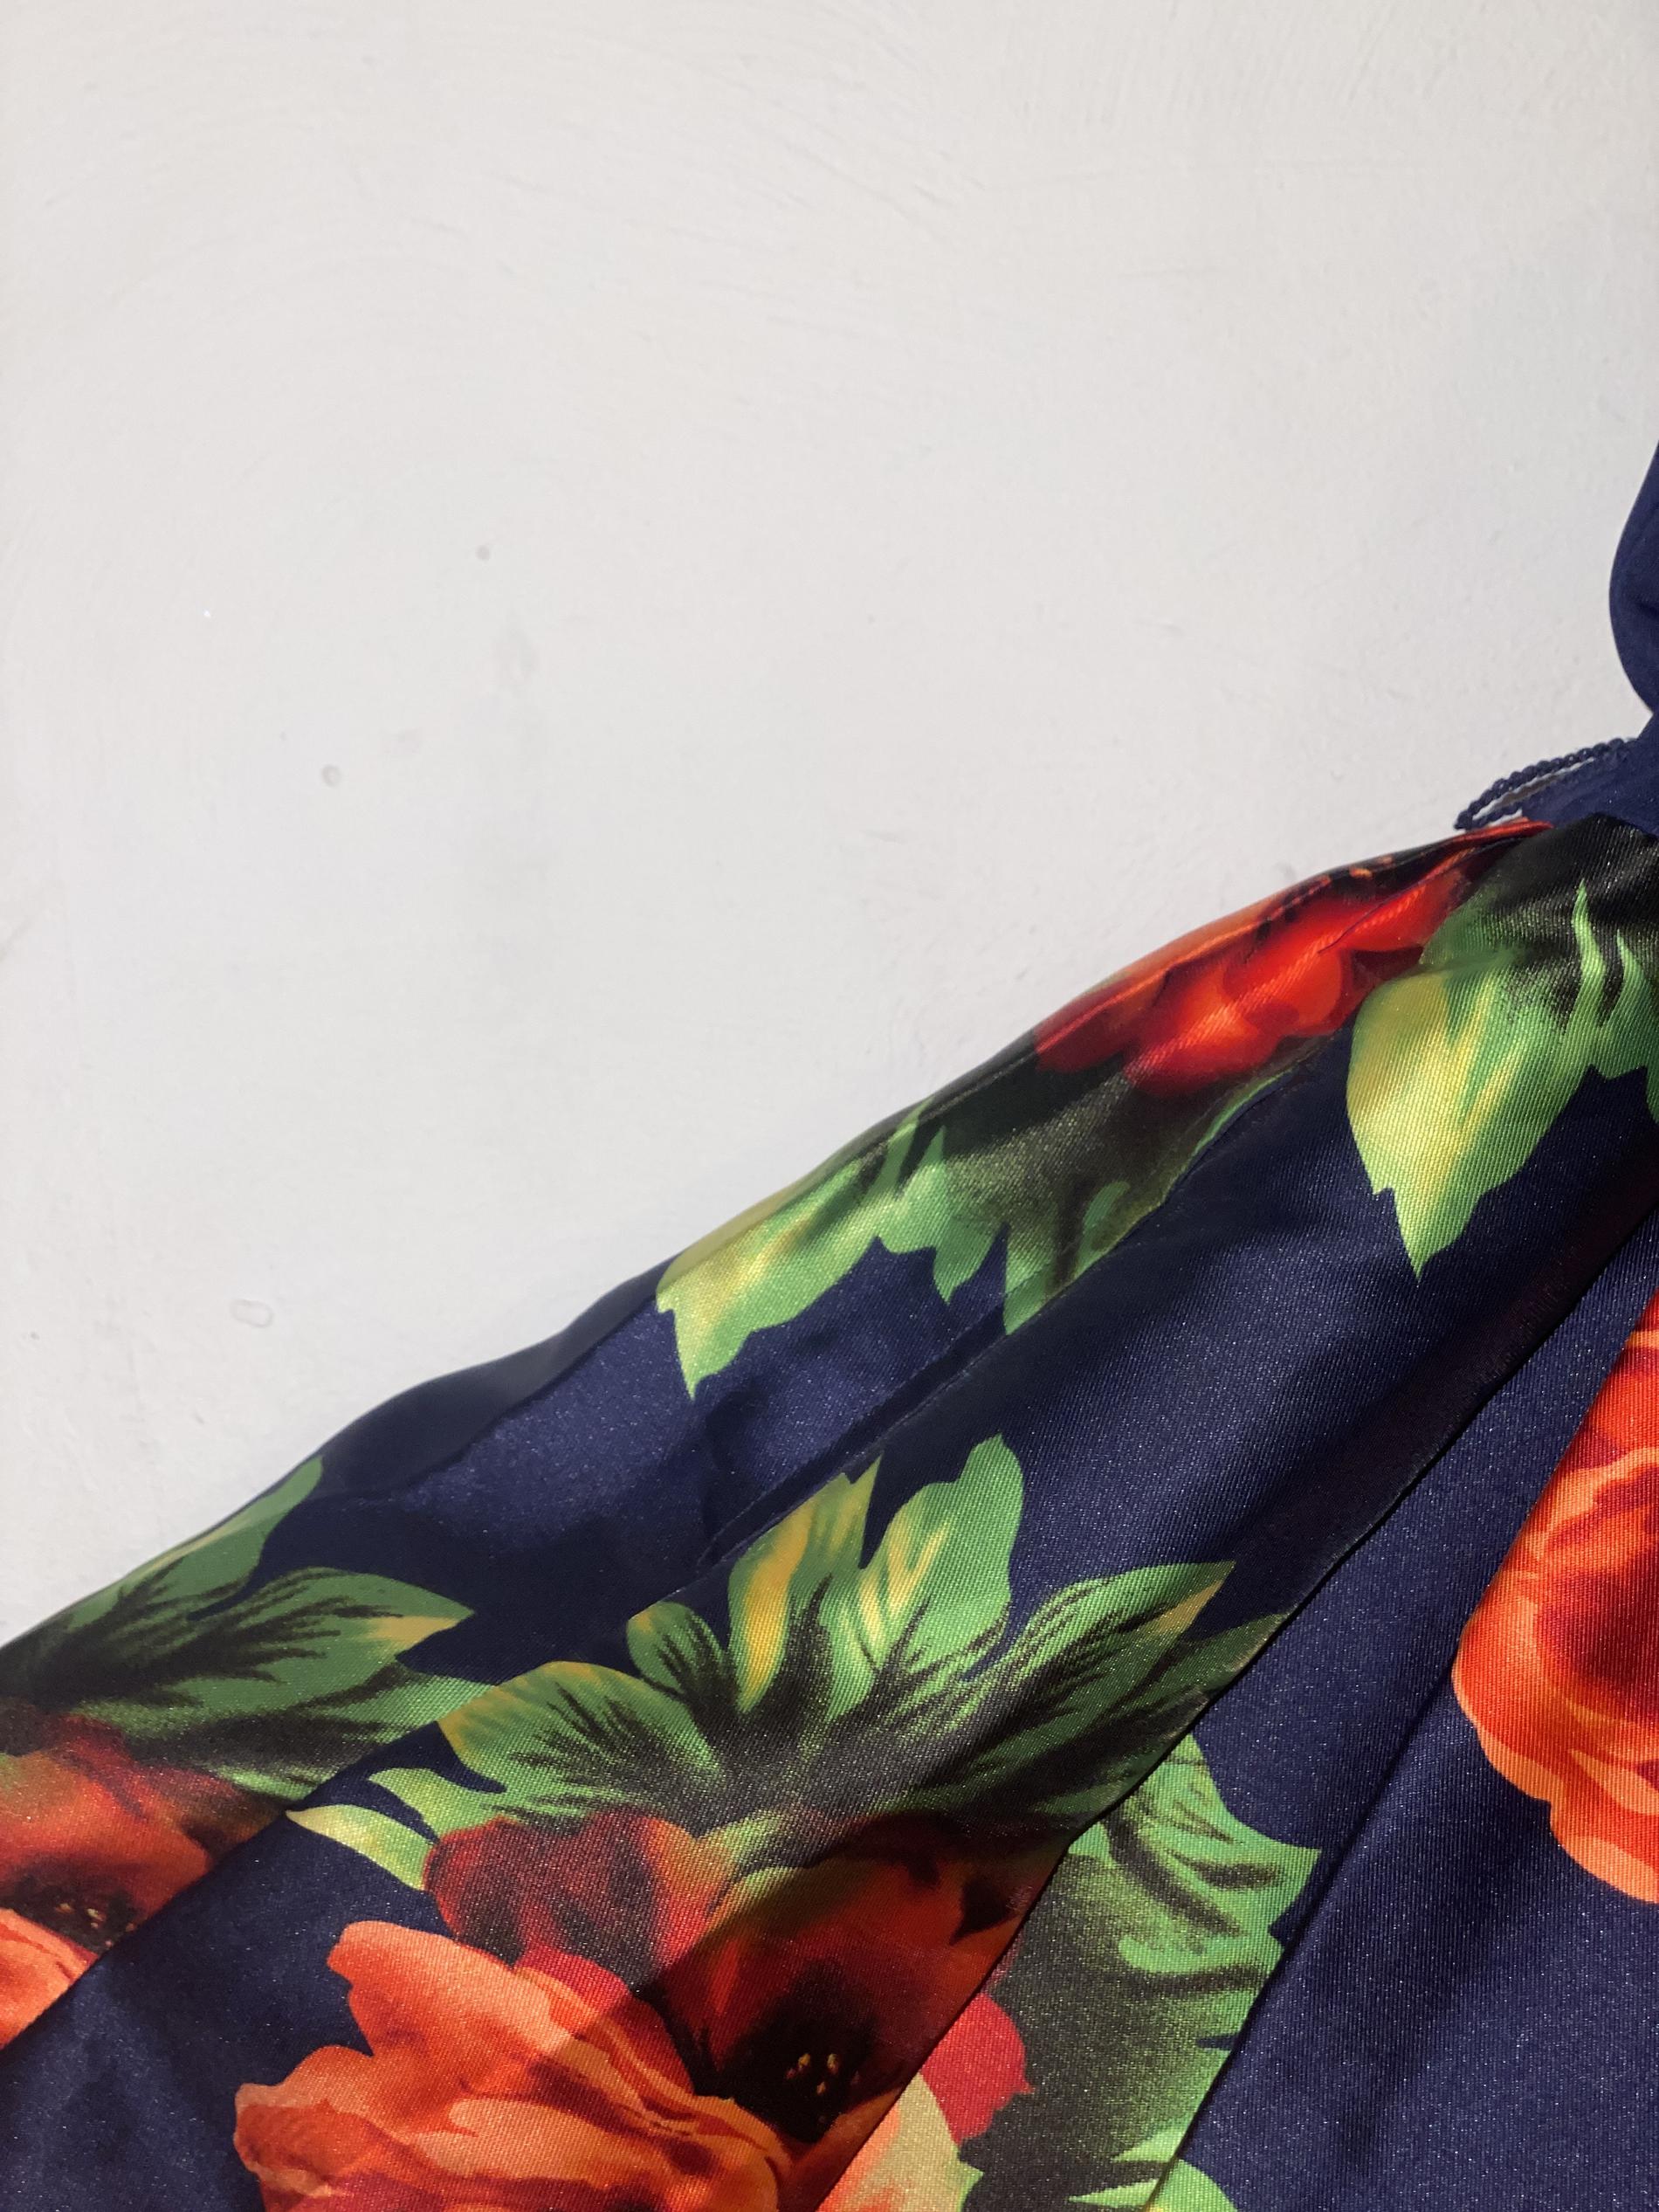 Size 4 Homecoming Floral Navy Blue Cocktail Dress on Queenly